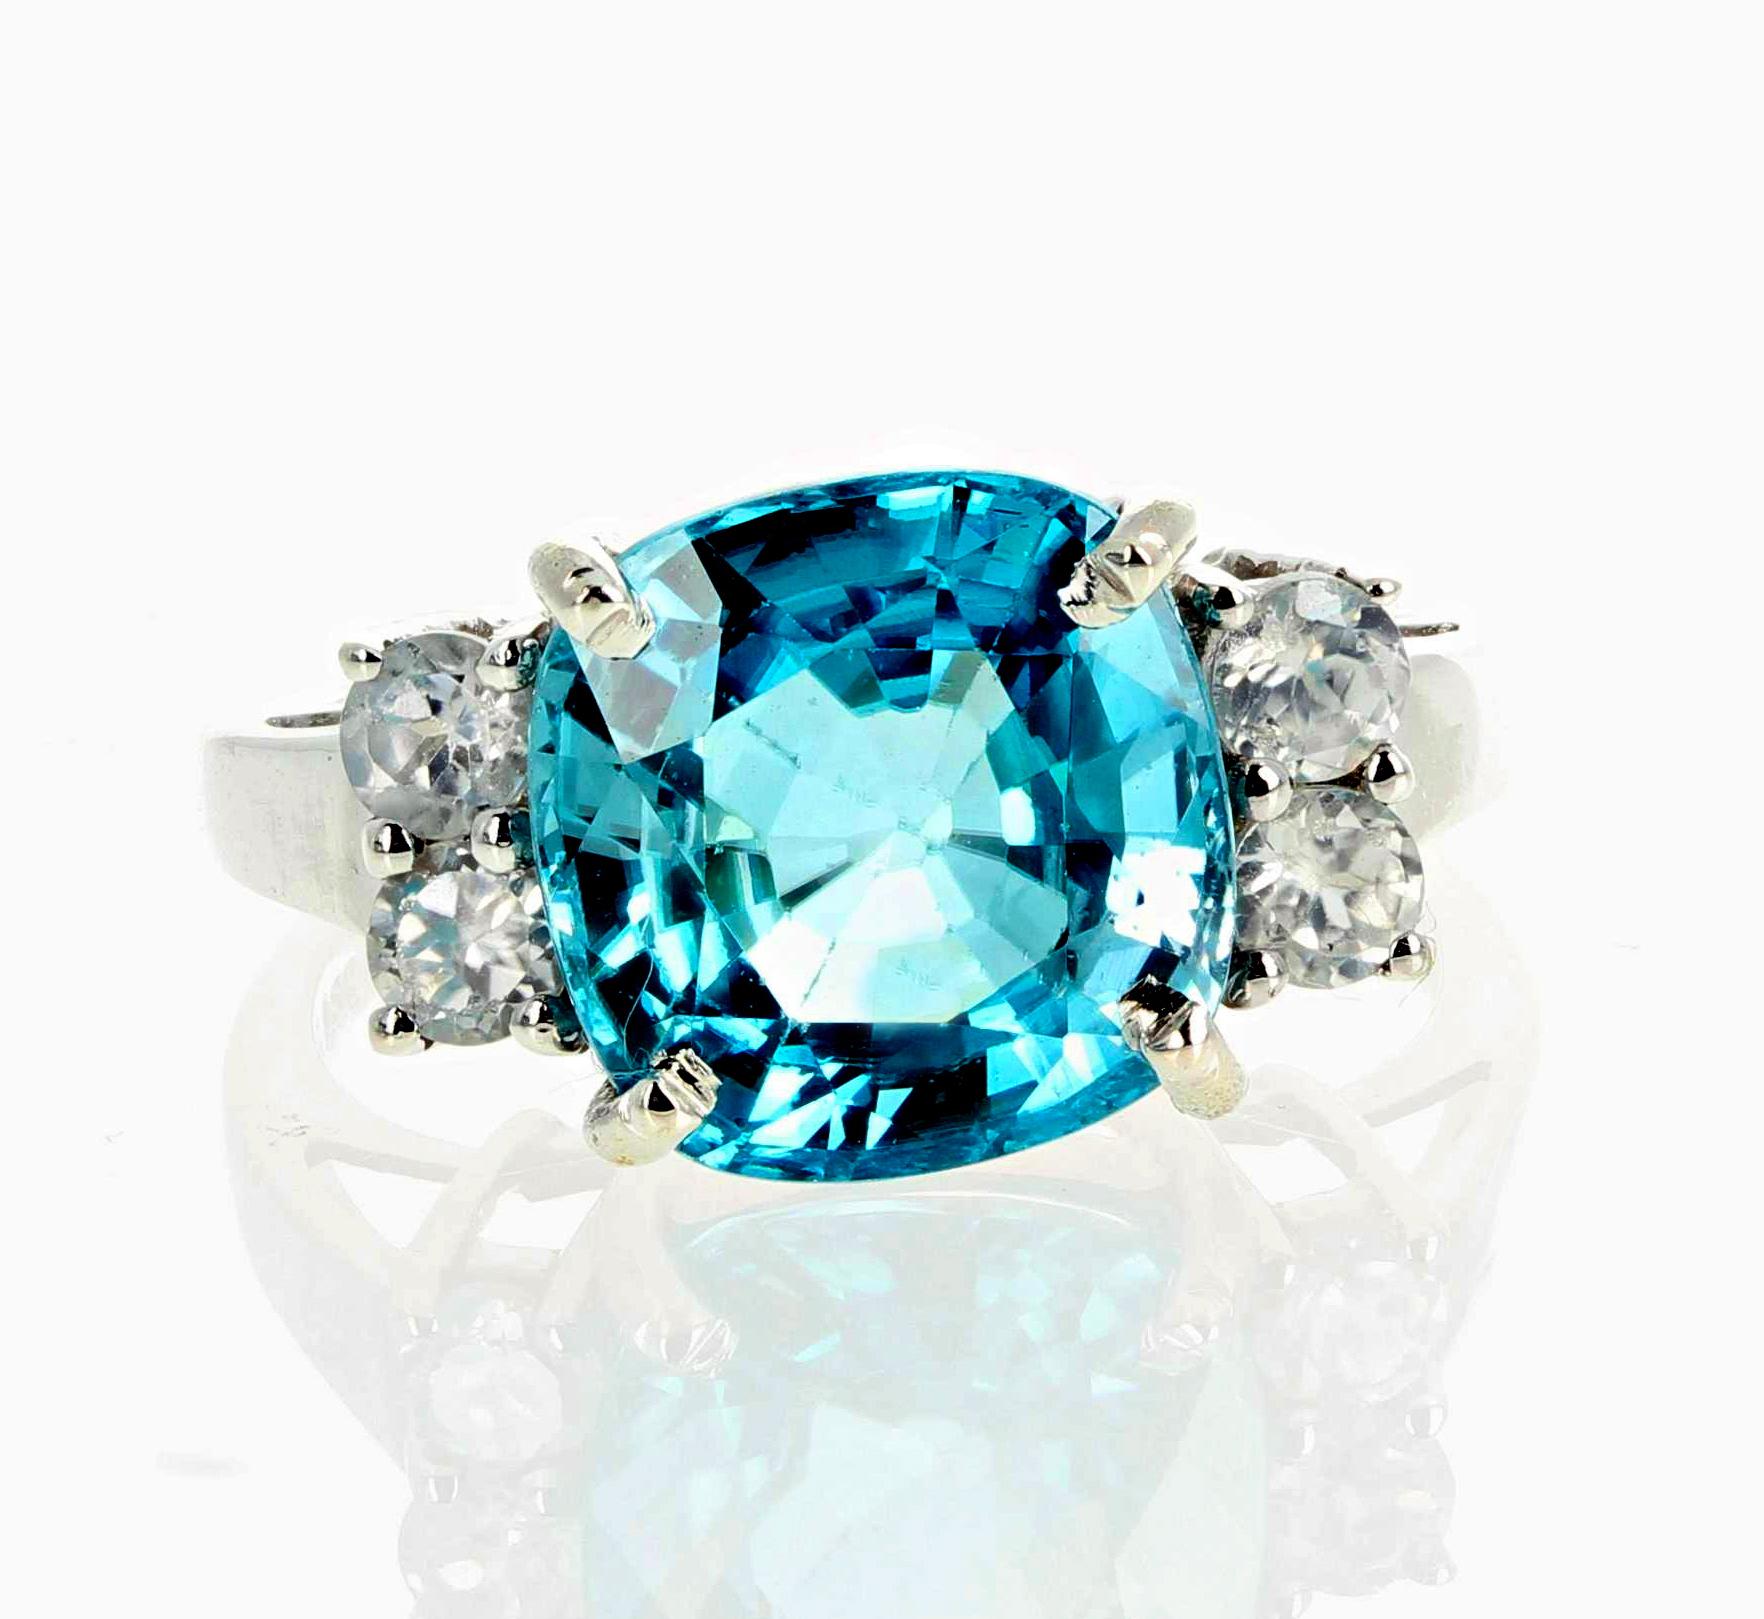 AJD Intense Blue 6.82Ct. Natural Cambodian Zircon & Real Diamonds Cocktail Ring 3